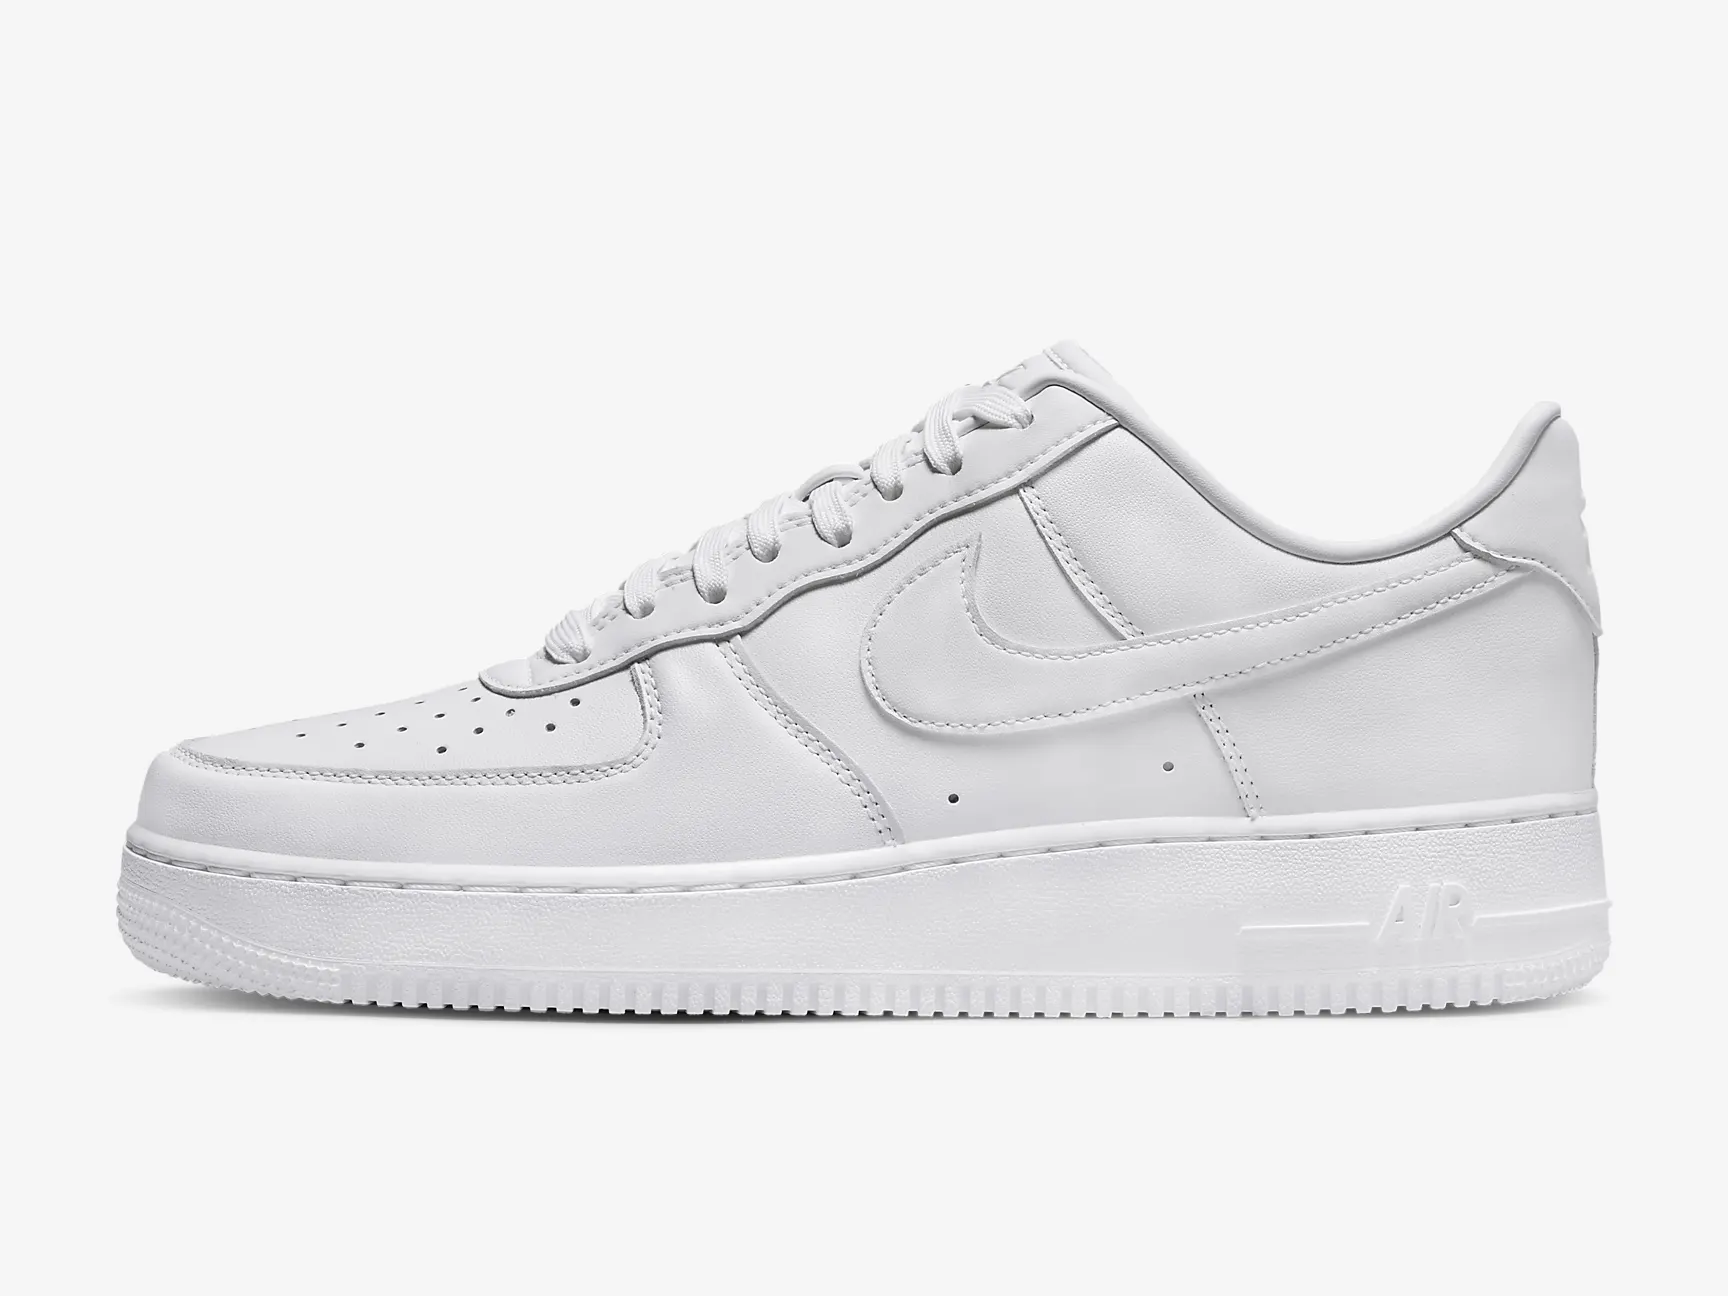 The Air Force 1 is a classic sneaker that has been around for decades. It's comfortable, stylish, and affordable.